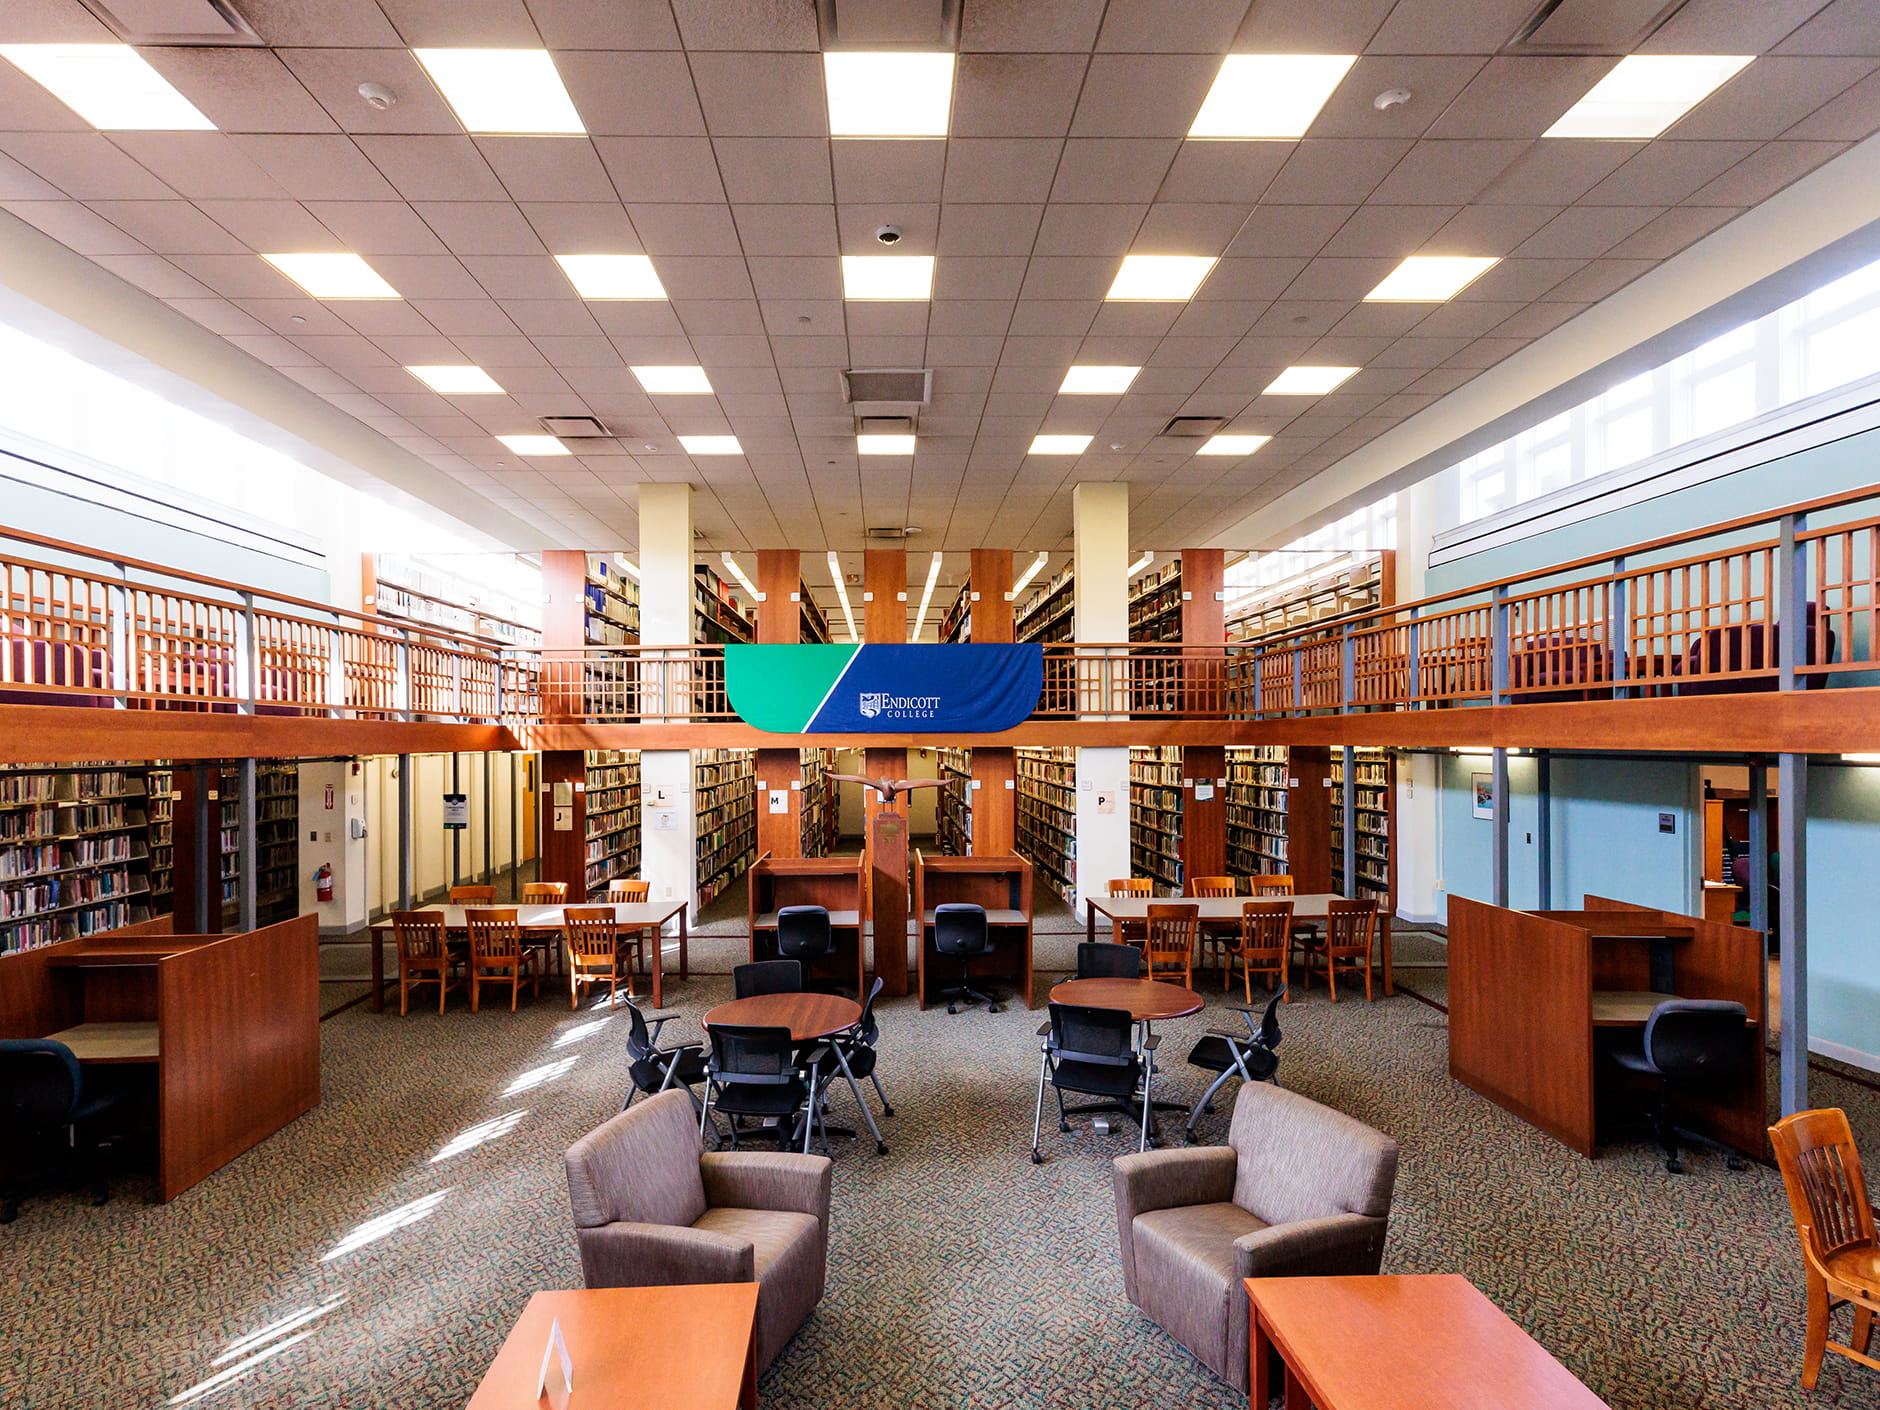 Over the summer, Endicott College’s Halle Library got a light refresh to make the space more open, engaging, and a destination for the college’s community.